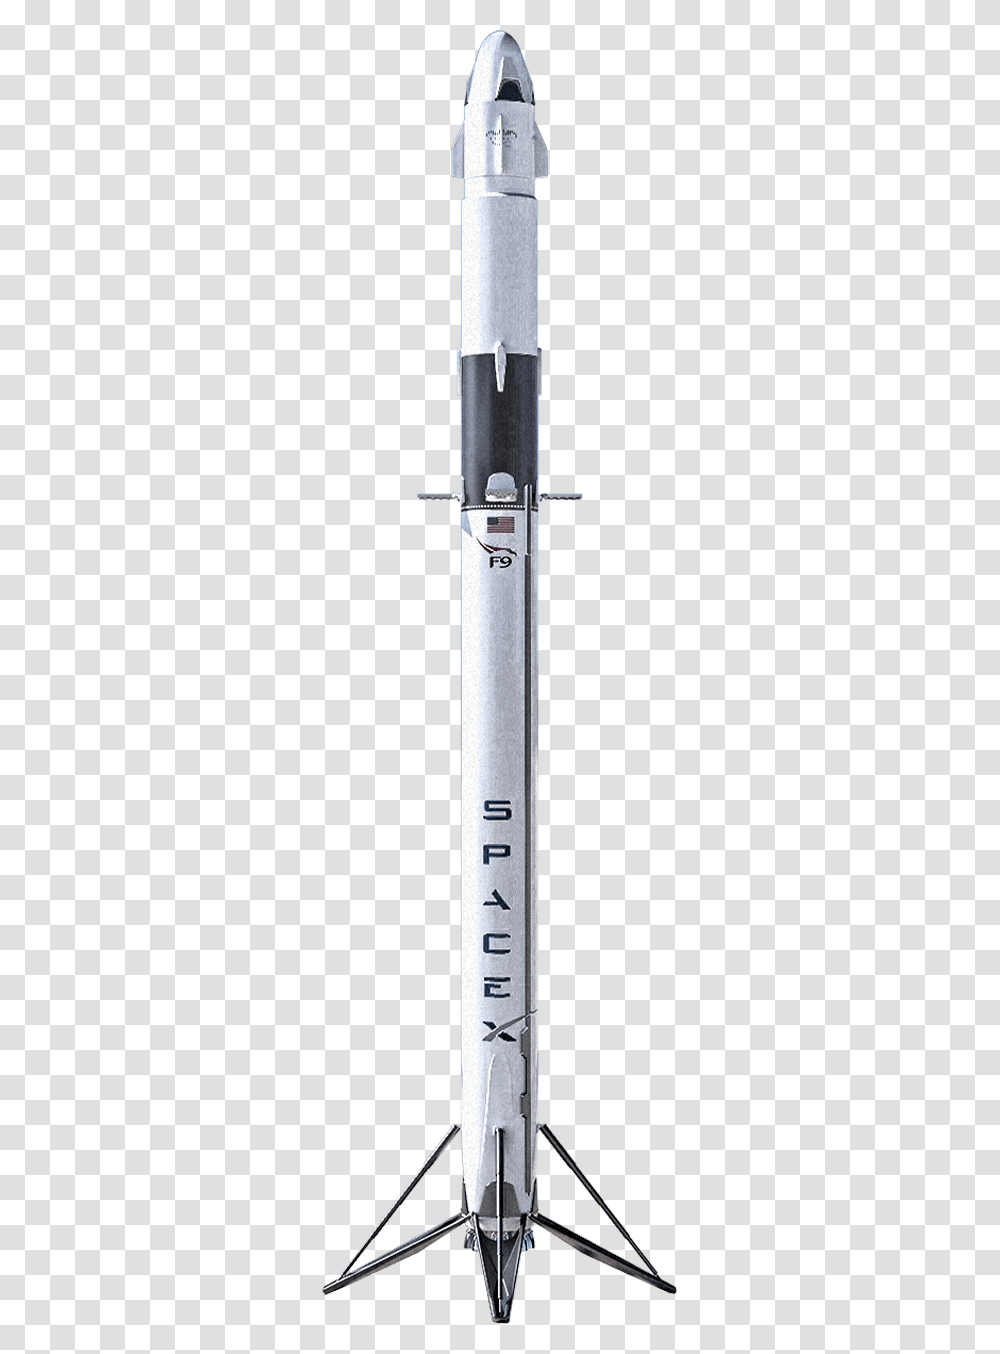 Spacex Falcon 9 Rocket Full Tool, Can Opener, Scale, Wrench, PEZ Dispenser Transparent Png